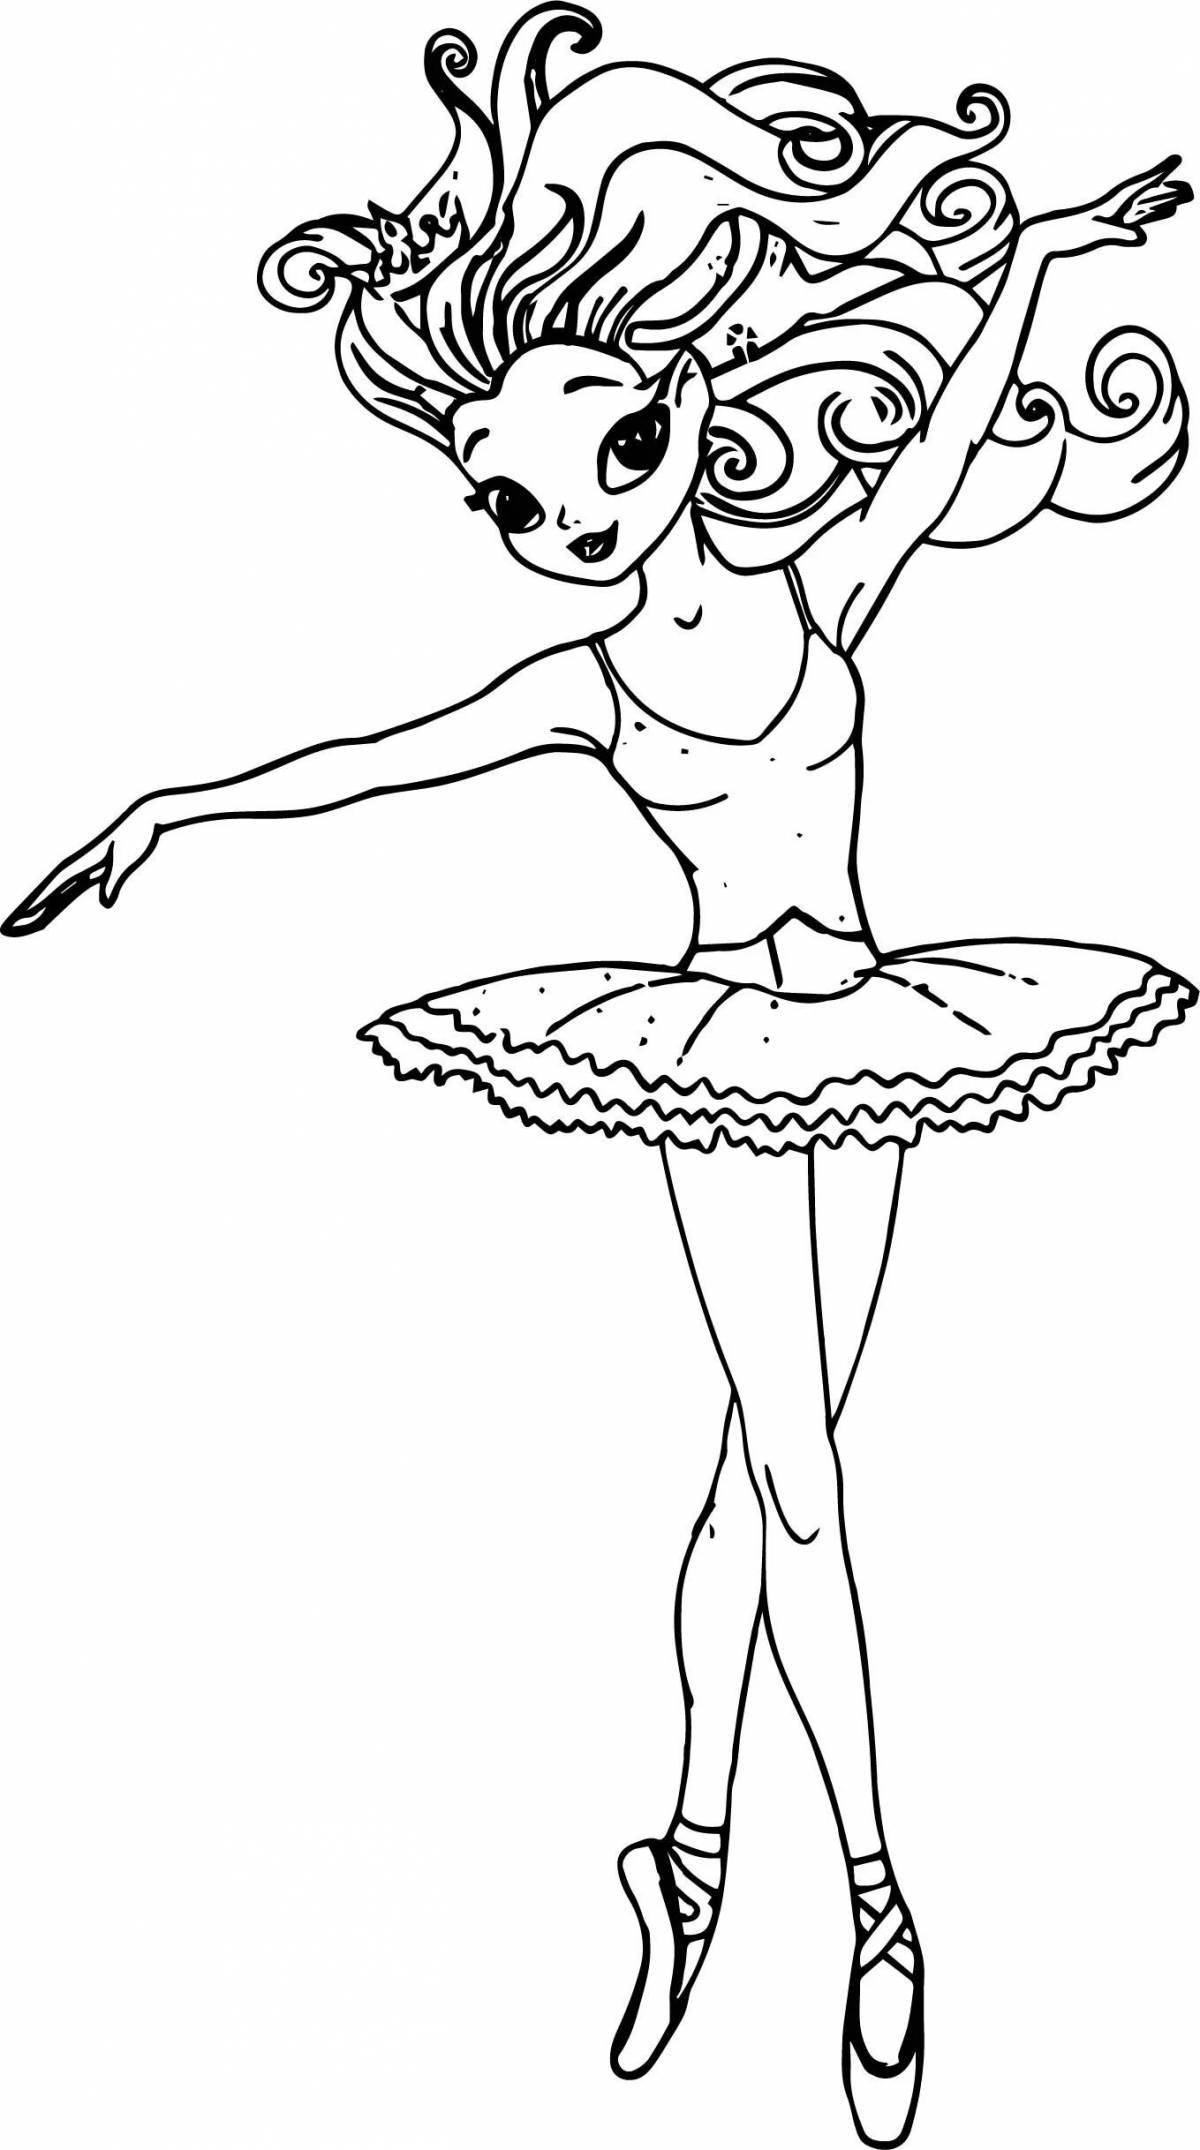 Living ballerina rabbit coloring page